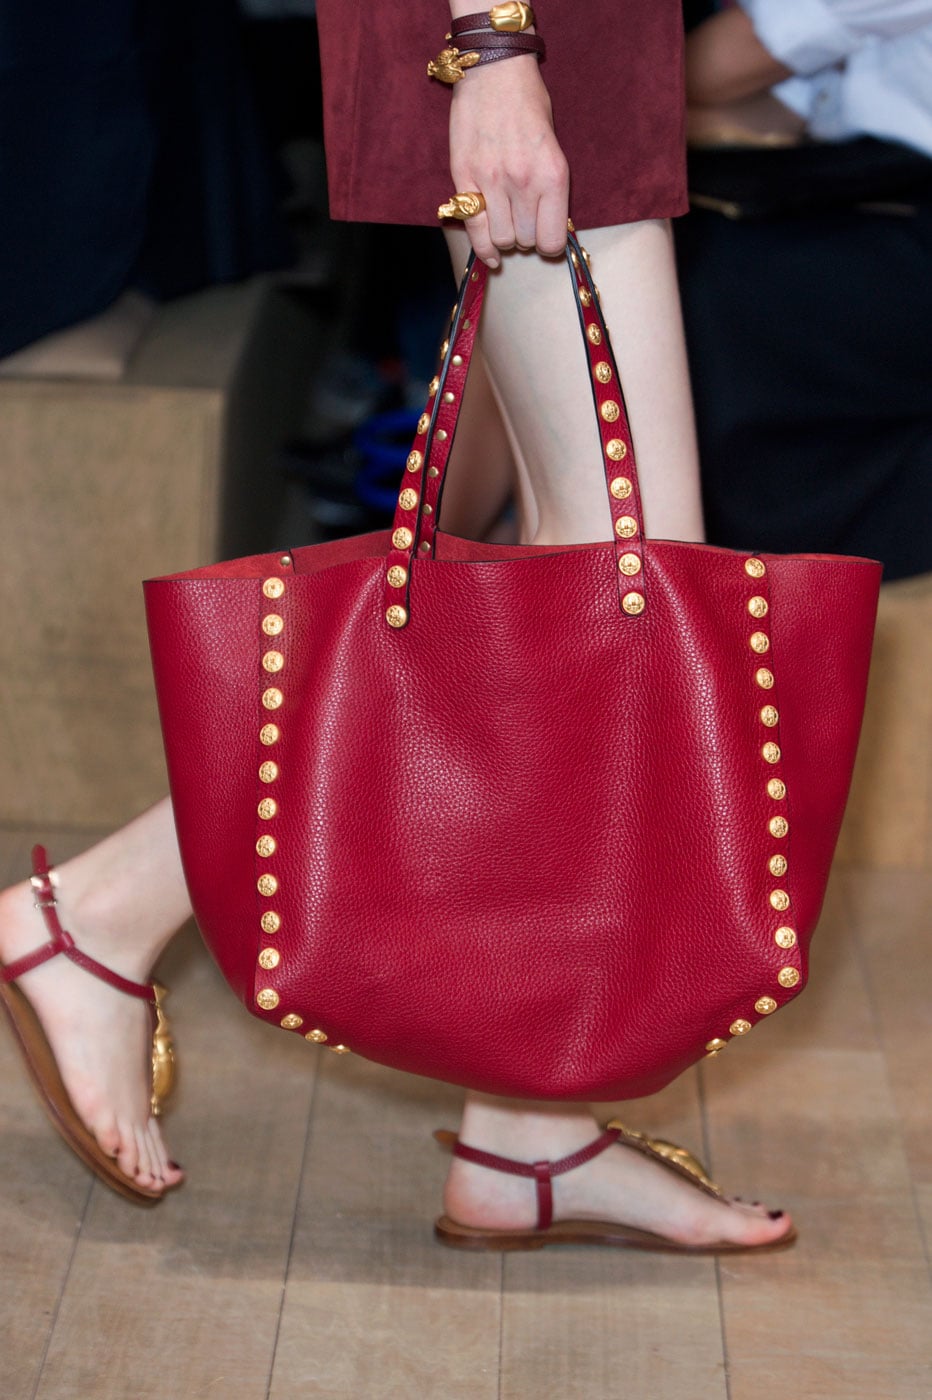 Valentino Spring | Sac, C'est Chic: The Best Bags From Paris Fashion Week 2014 | Fashion Photo 59